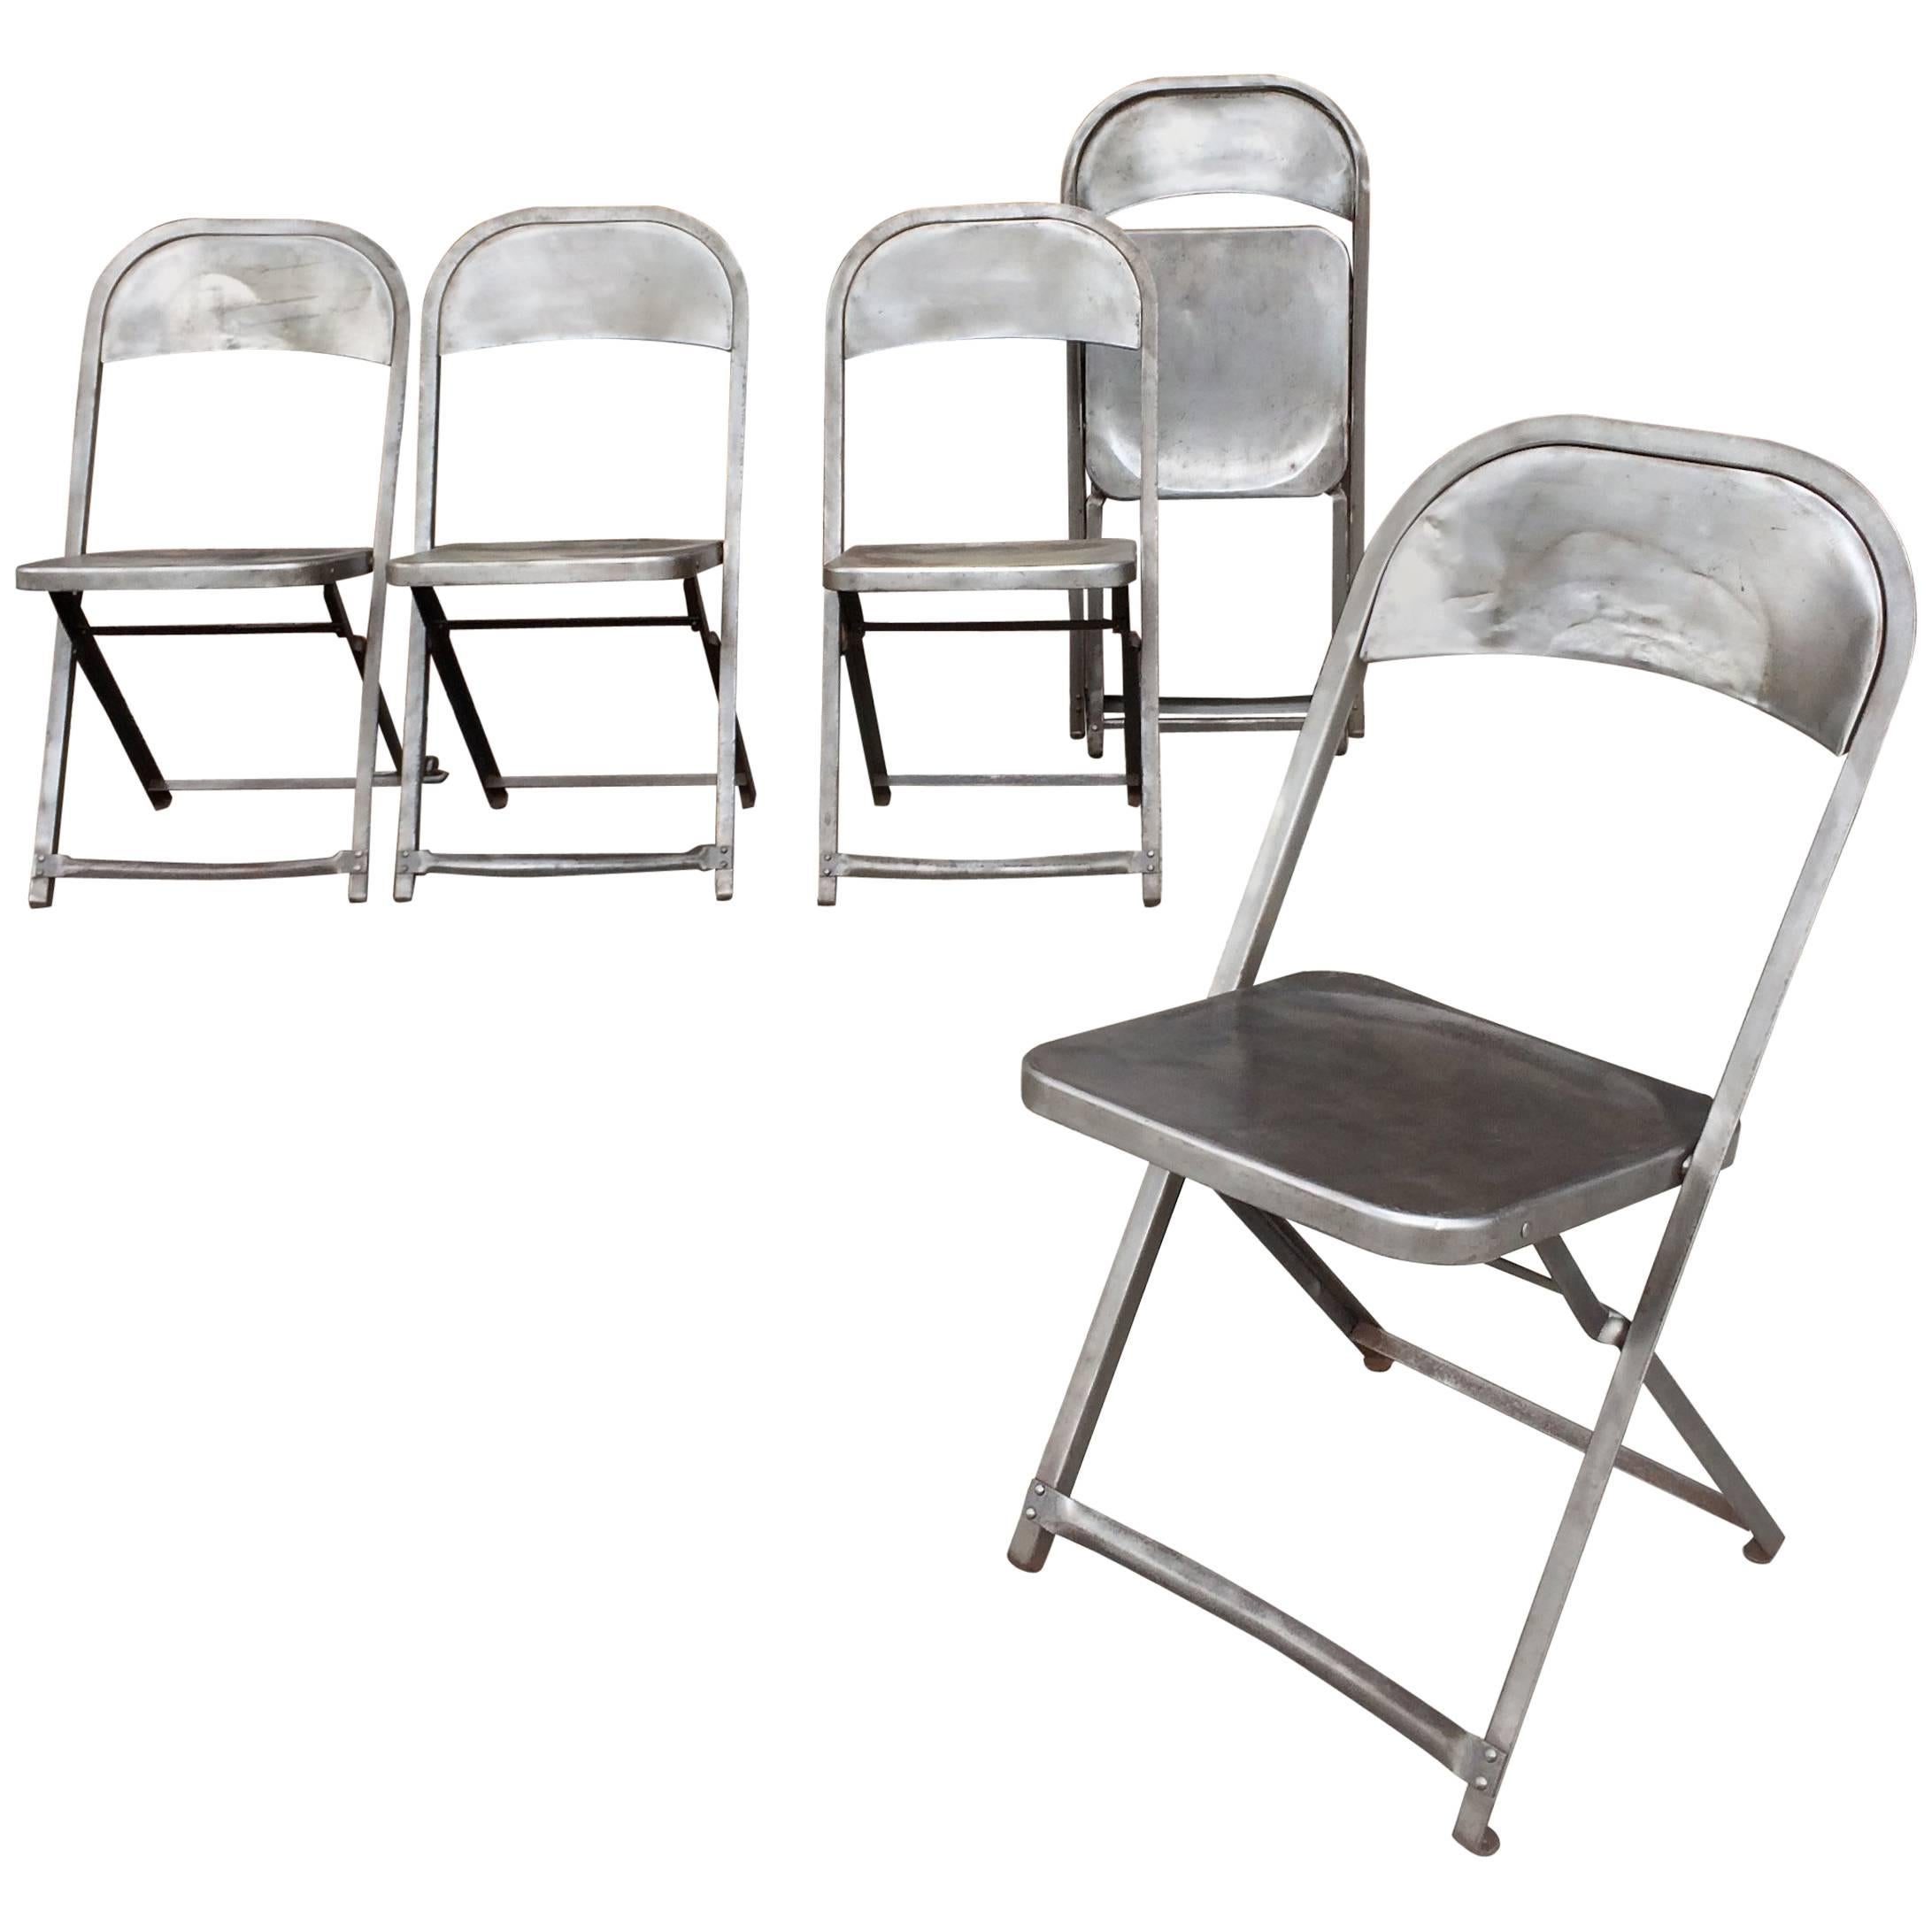 Industrial Brushed Steel Folding Chairs